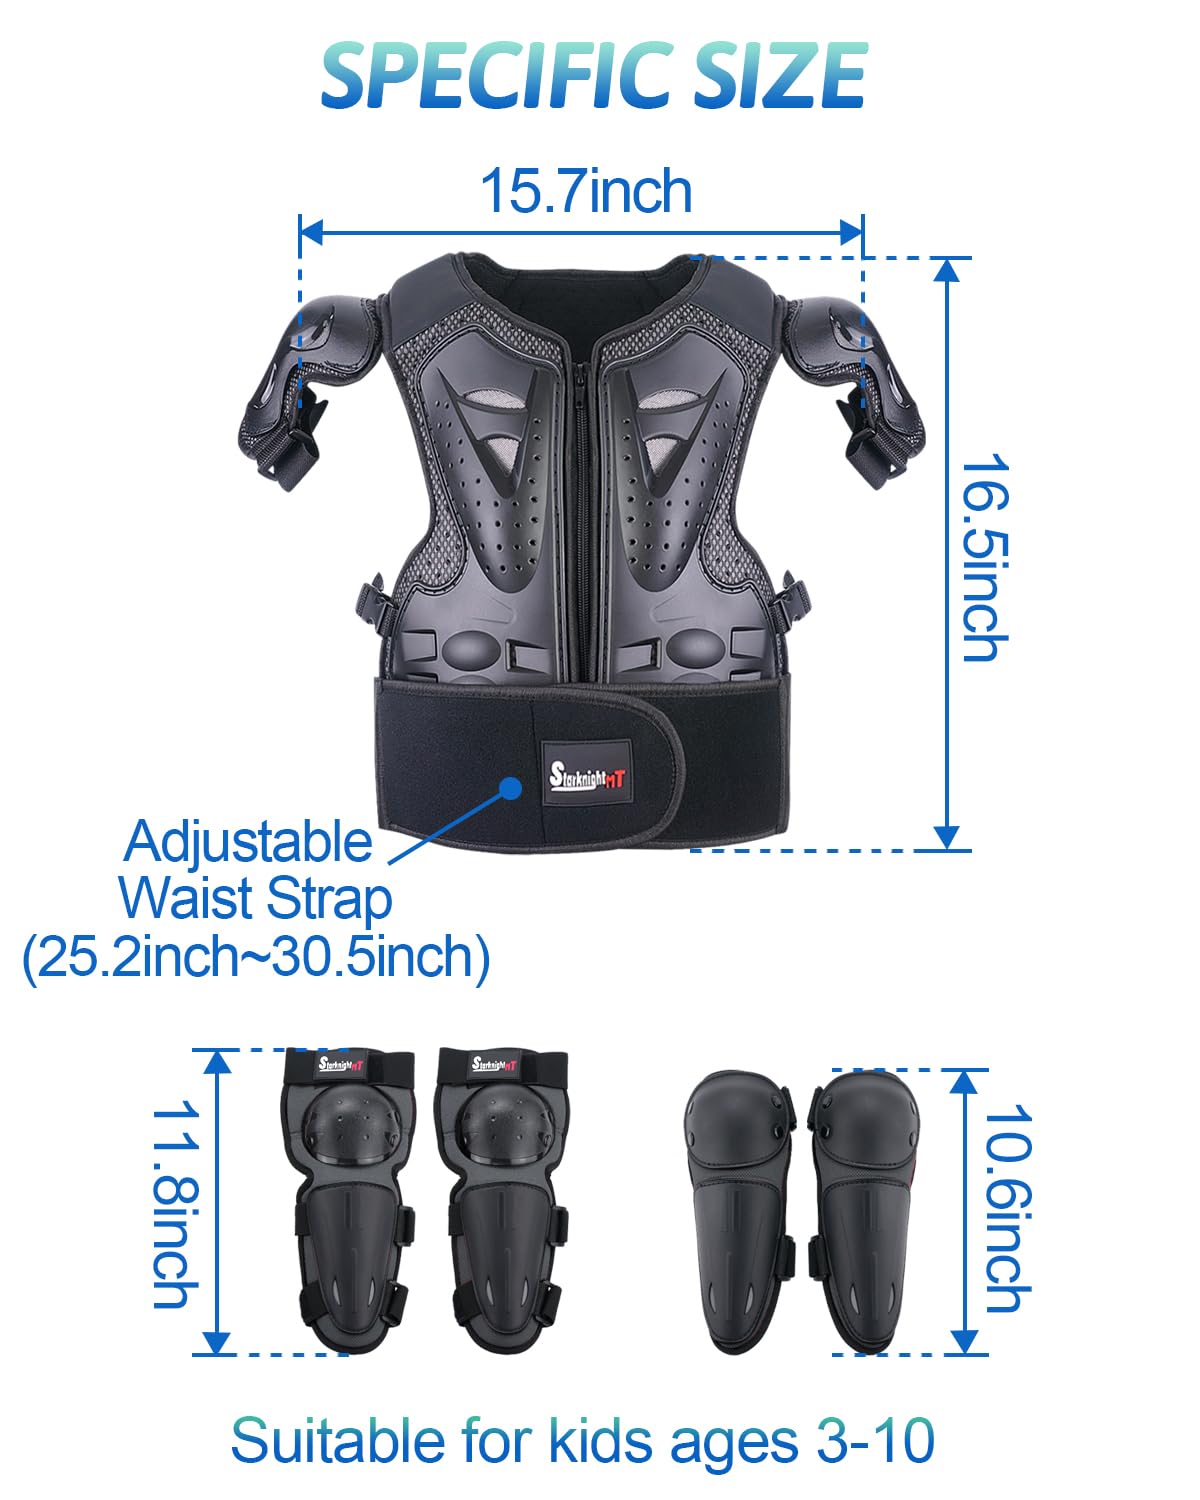 specific size armor suit for kids aged 3-10